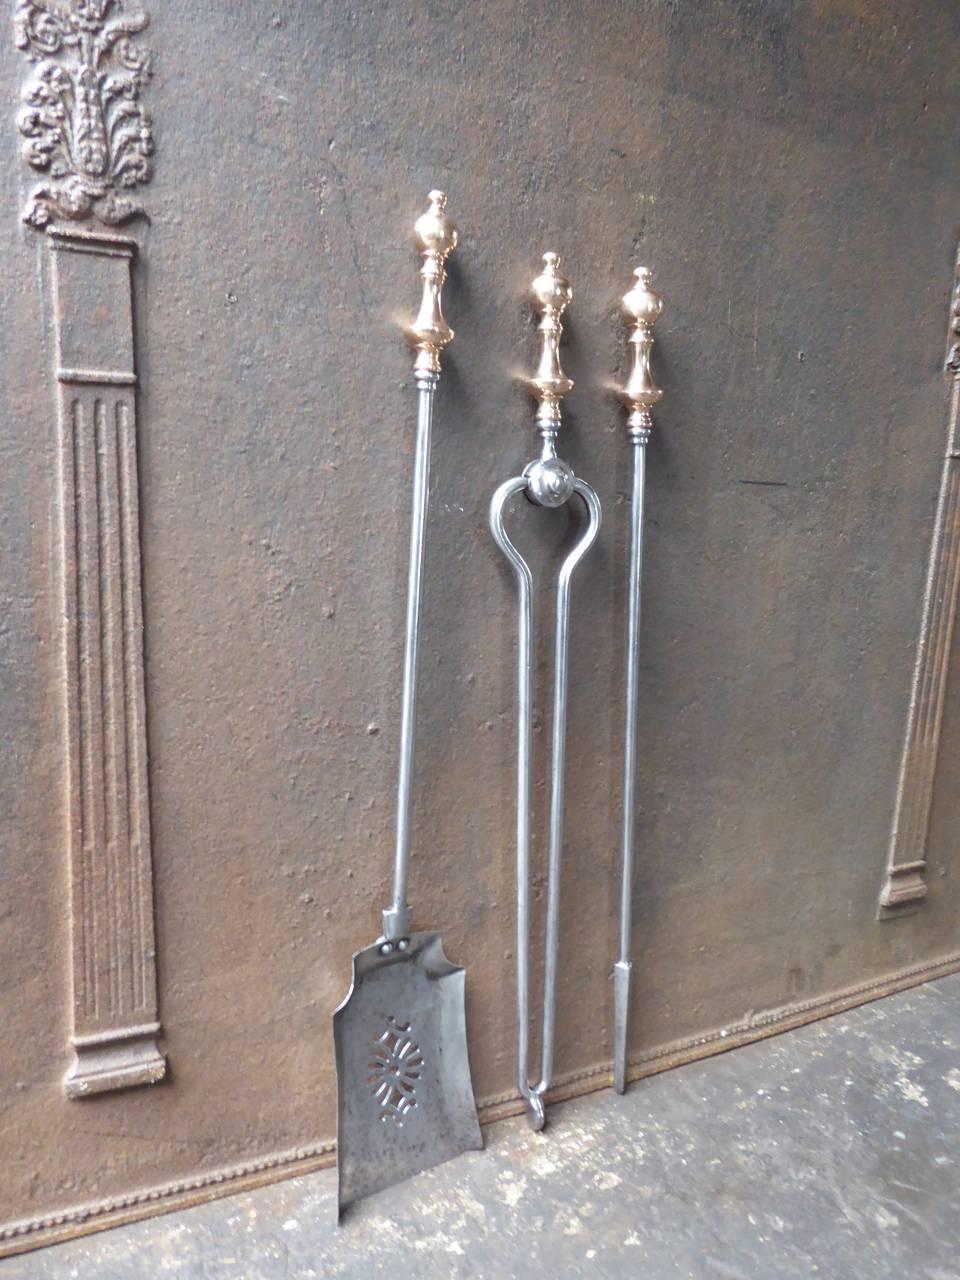 19th century English firetools fire irons made of polished steel and polished copper.

We have a unique and specialized collection of antique and used fireplace accessories consisting of more than 1000 listings at 1stdibs. Amongst others, we always